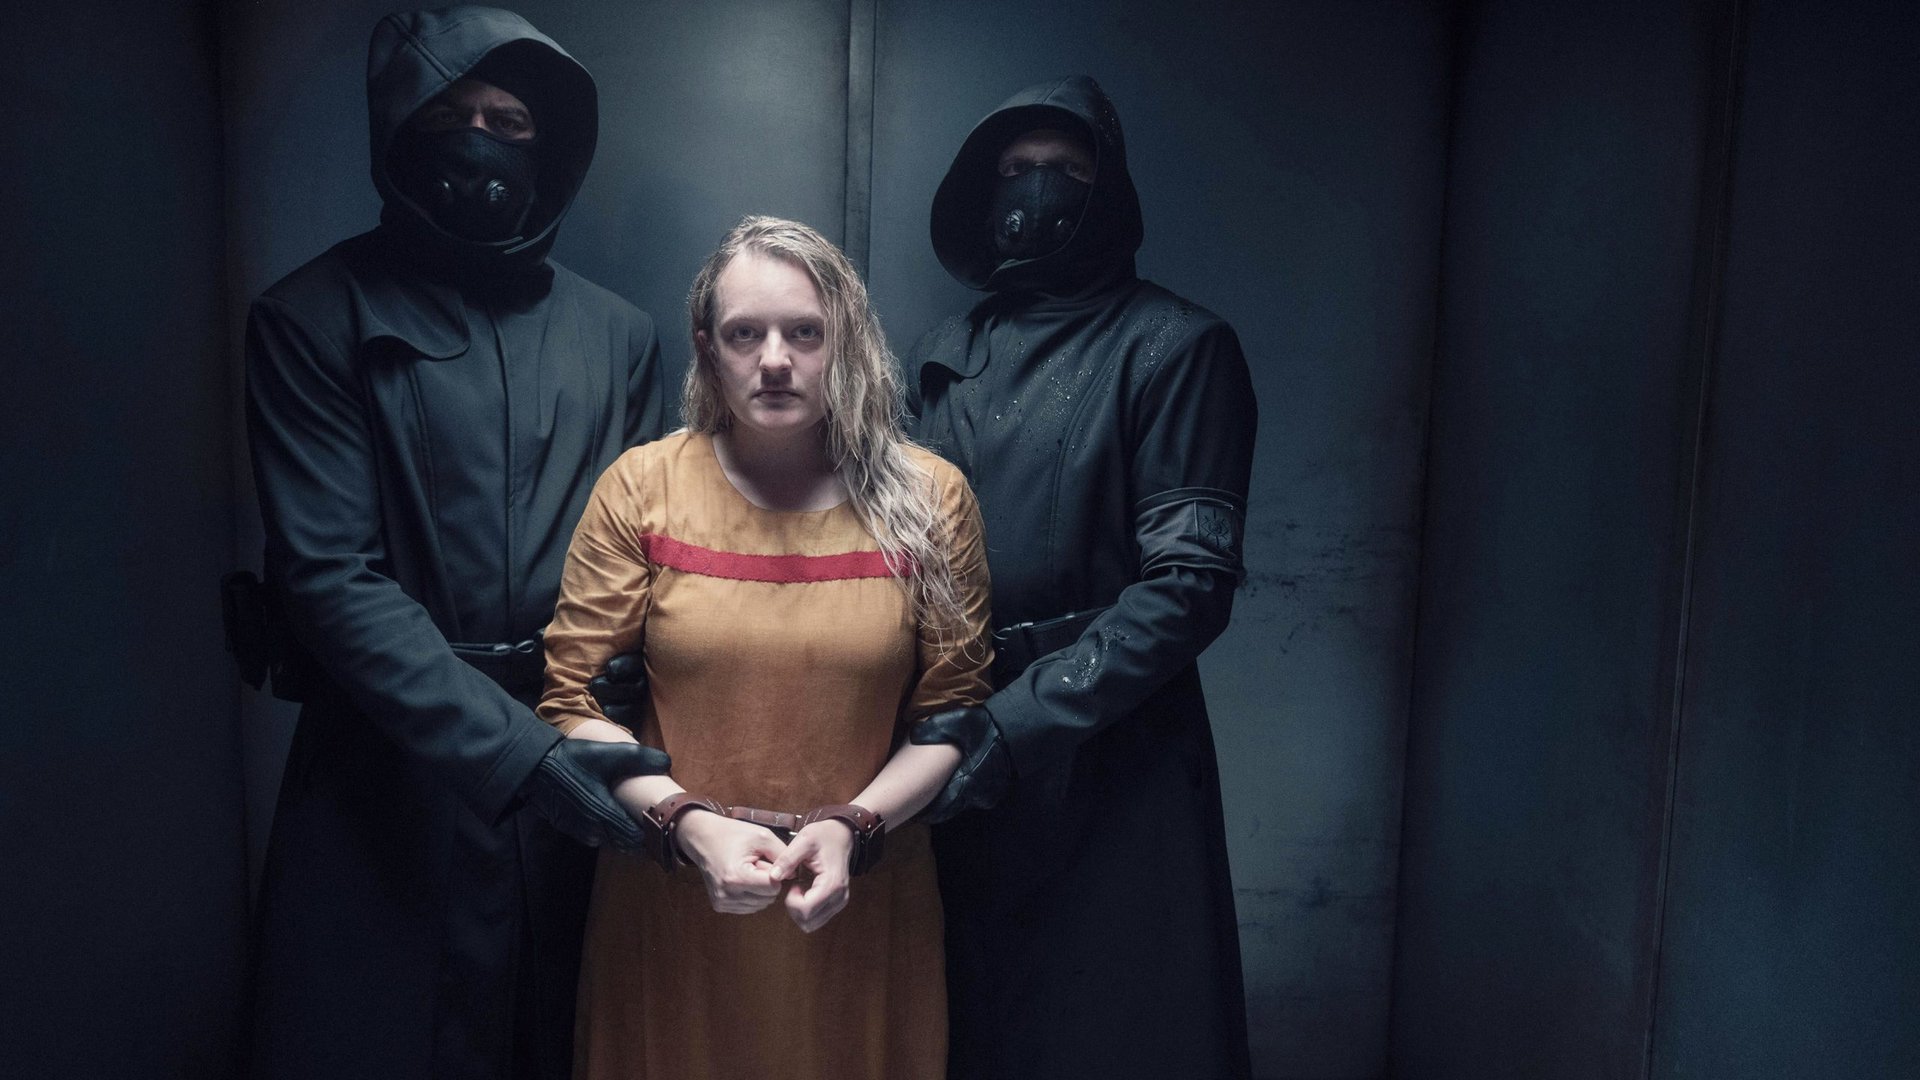 A woman is handcuffed by two masked men in Season 5 of The Handmaids Tale, new to Hulu